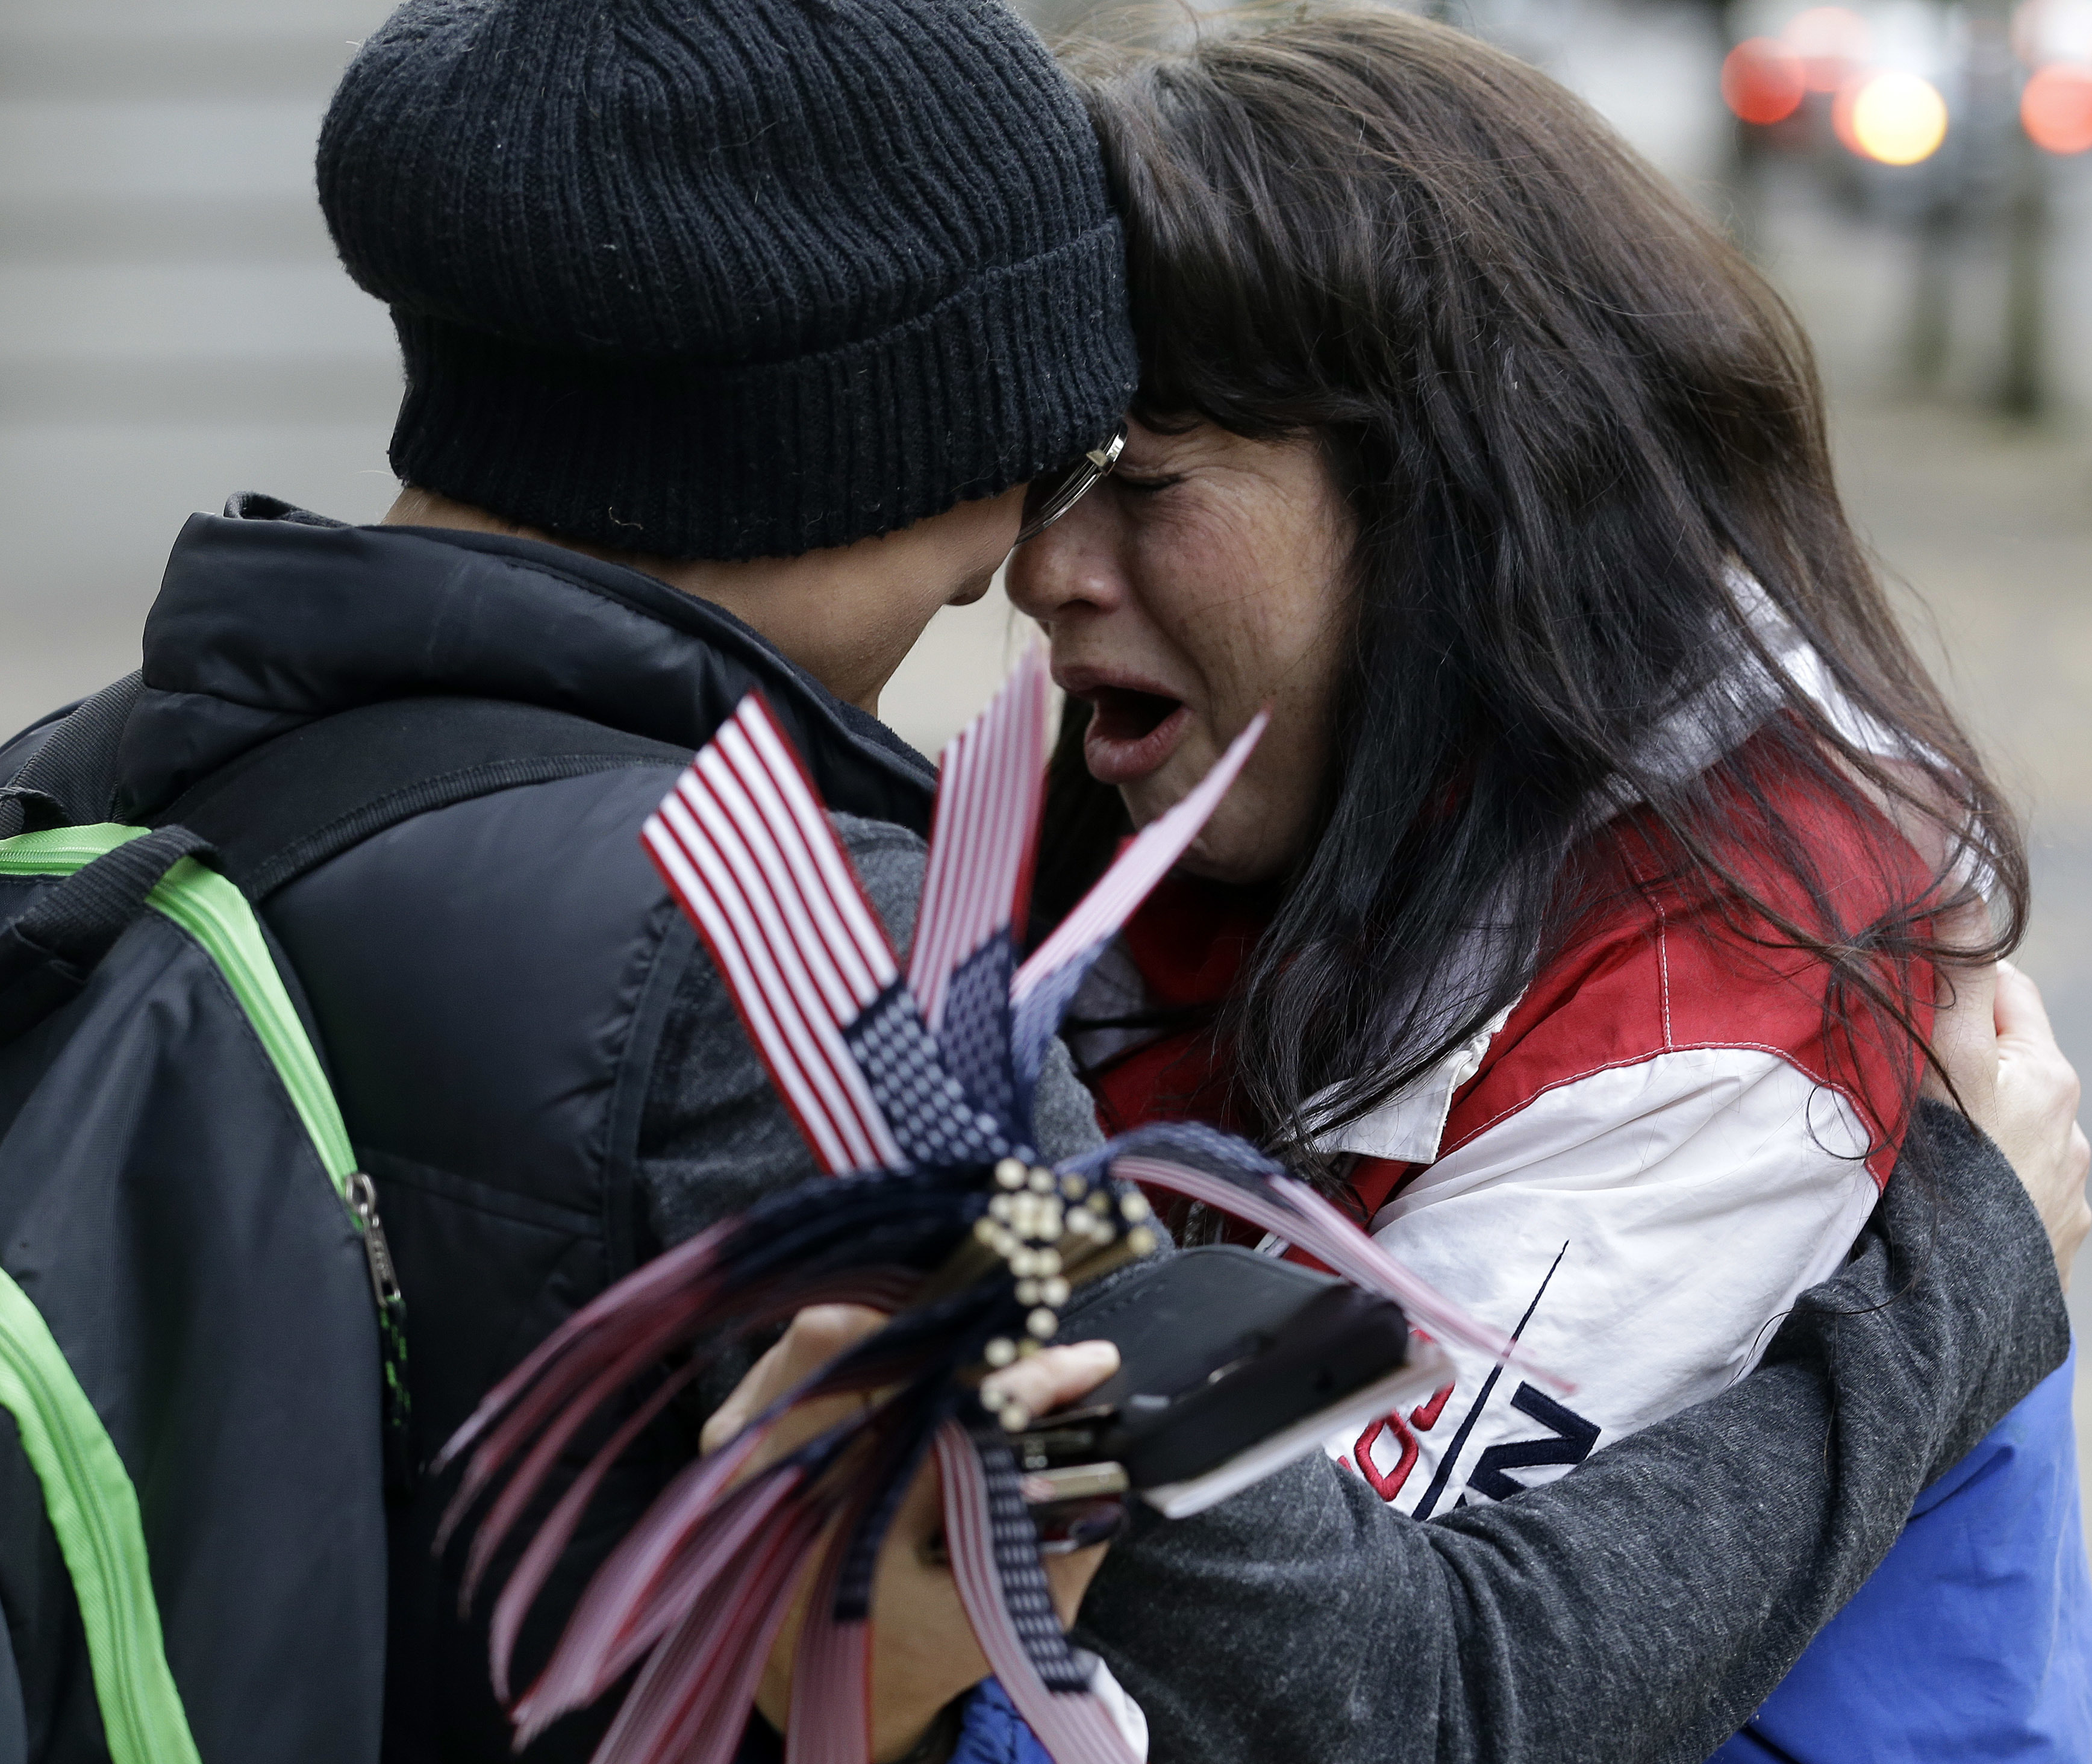 Maureen Valdez, right, cries and hugs another supporter after hearing a verdict outside federal court in Portland, Ore., Thursday, Oct. 27, 2016. A jury exonerated brothers Ammon and Ryan Bundy and five others of conspiring to impede federal workers from their jobs at the Malheur National Wildlife Refuge. (AP Photo/Don Ryan)